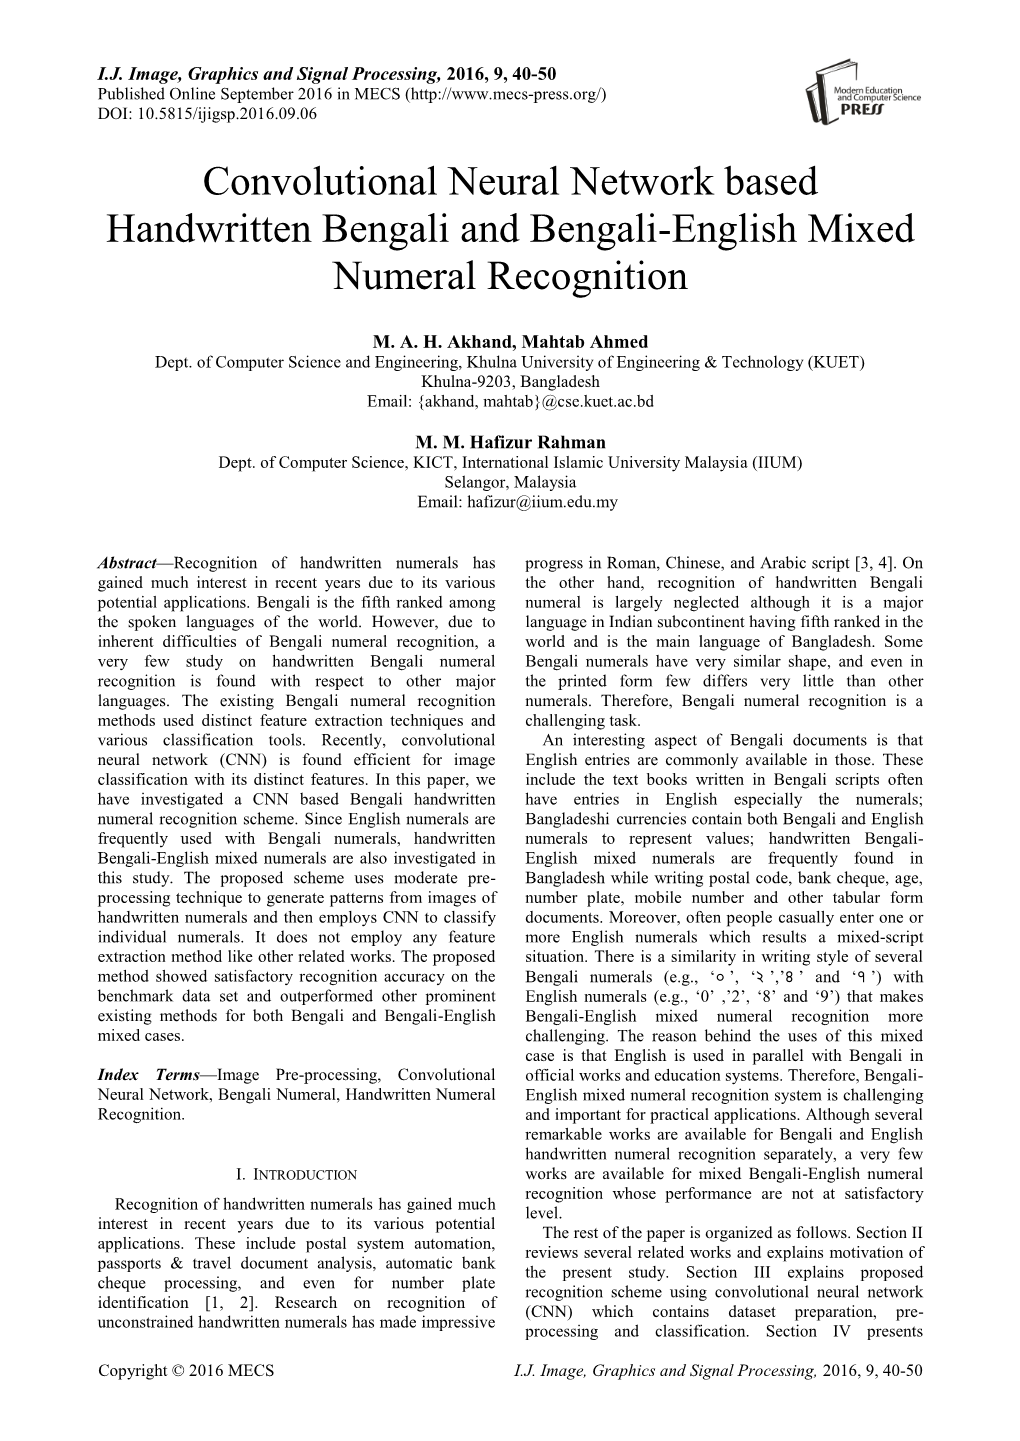 Convolutional Neural Network Based Handwritten Bengali and Bengali-English Mixed Numeral Recognition